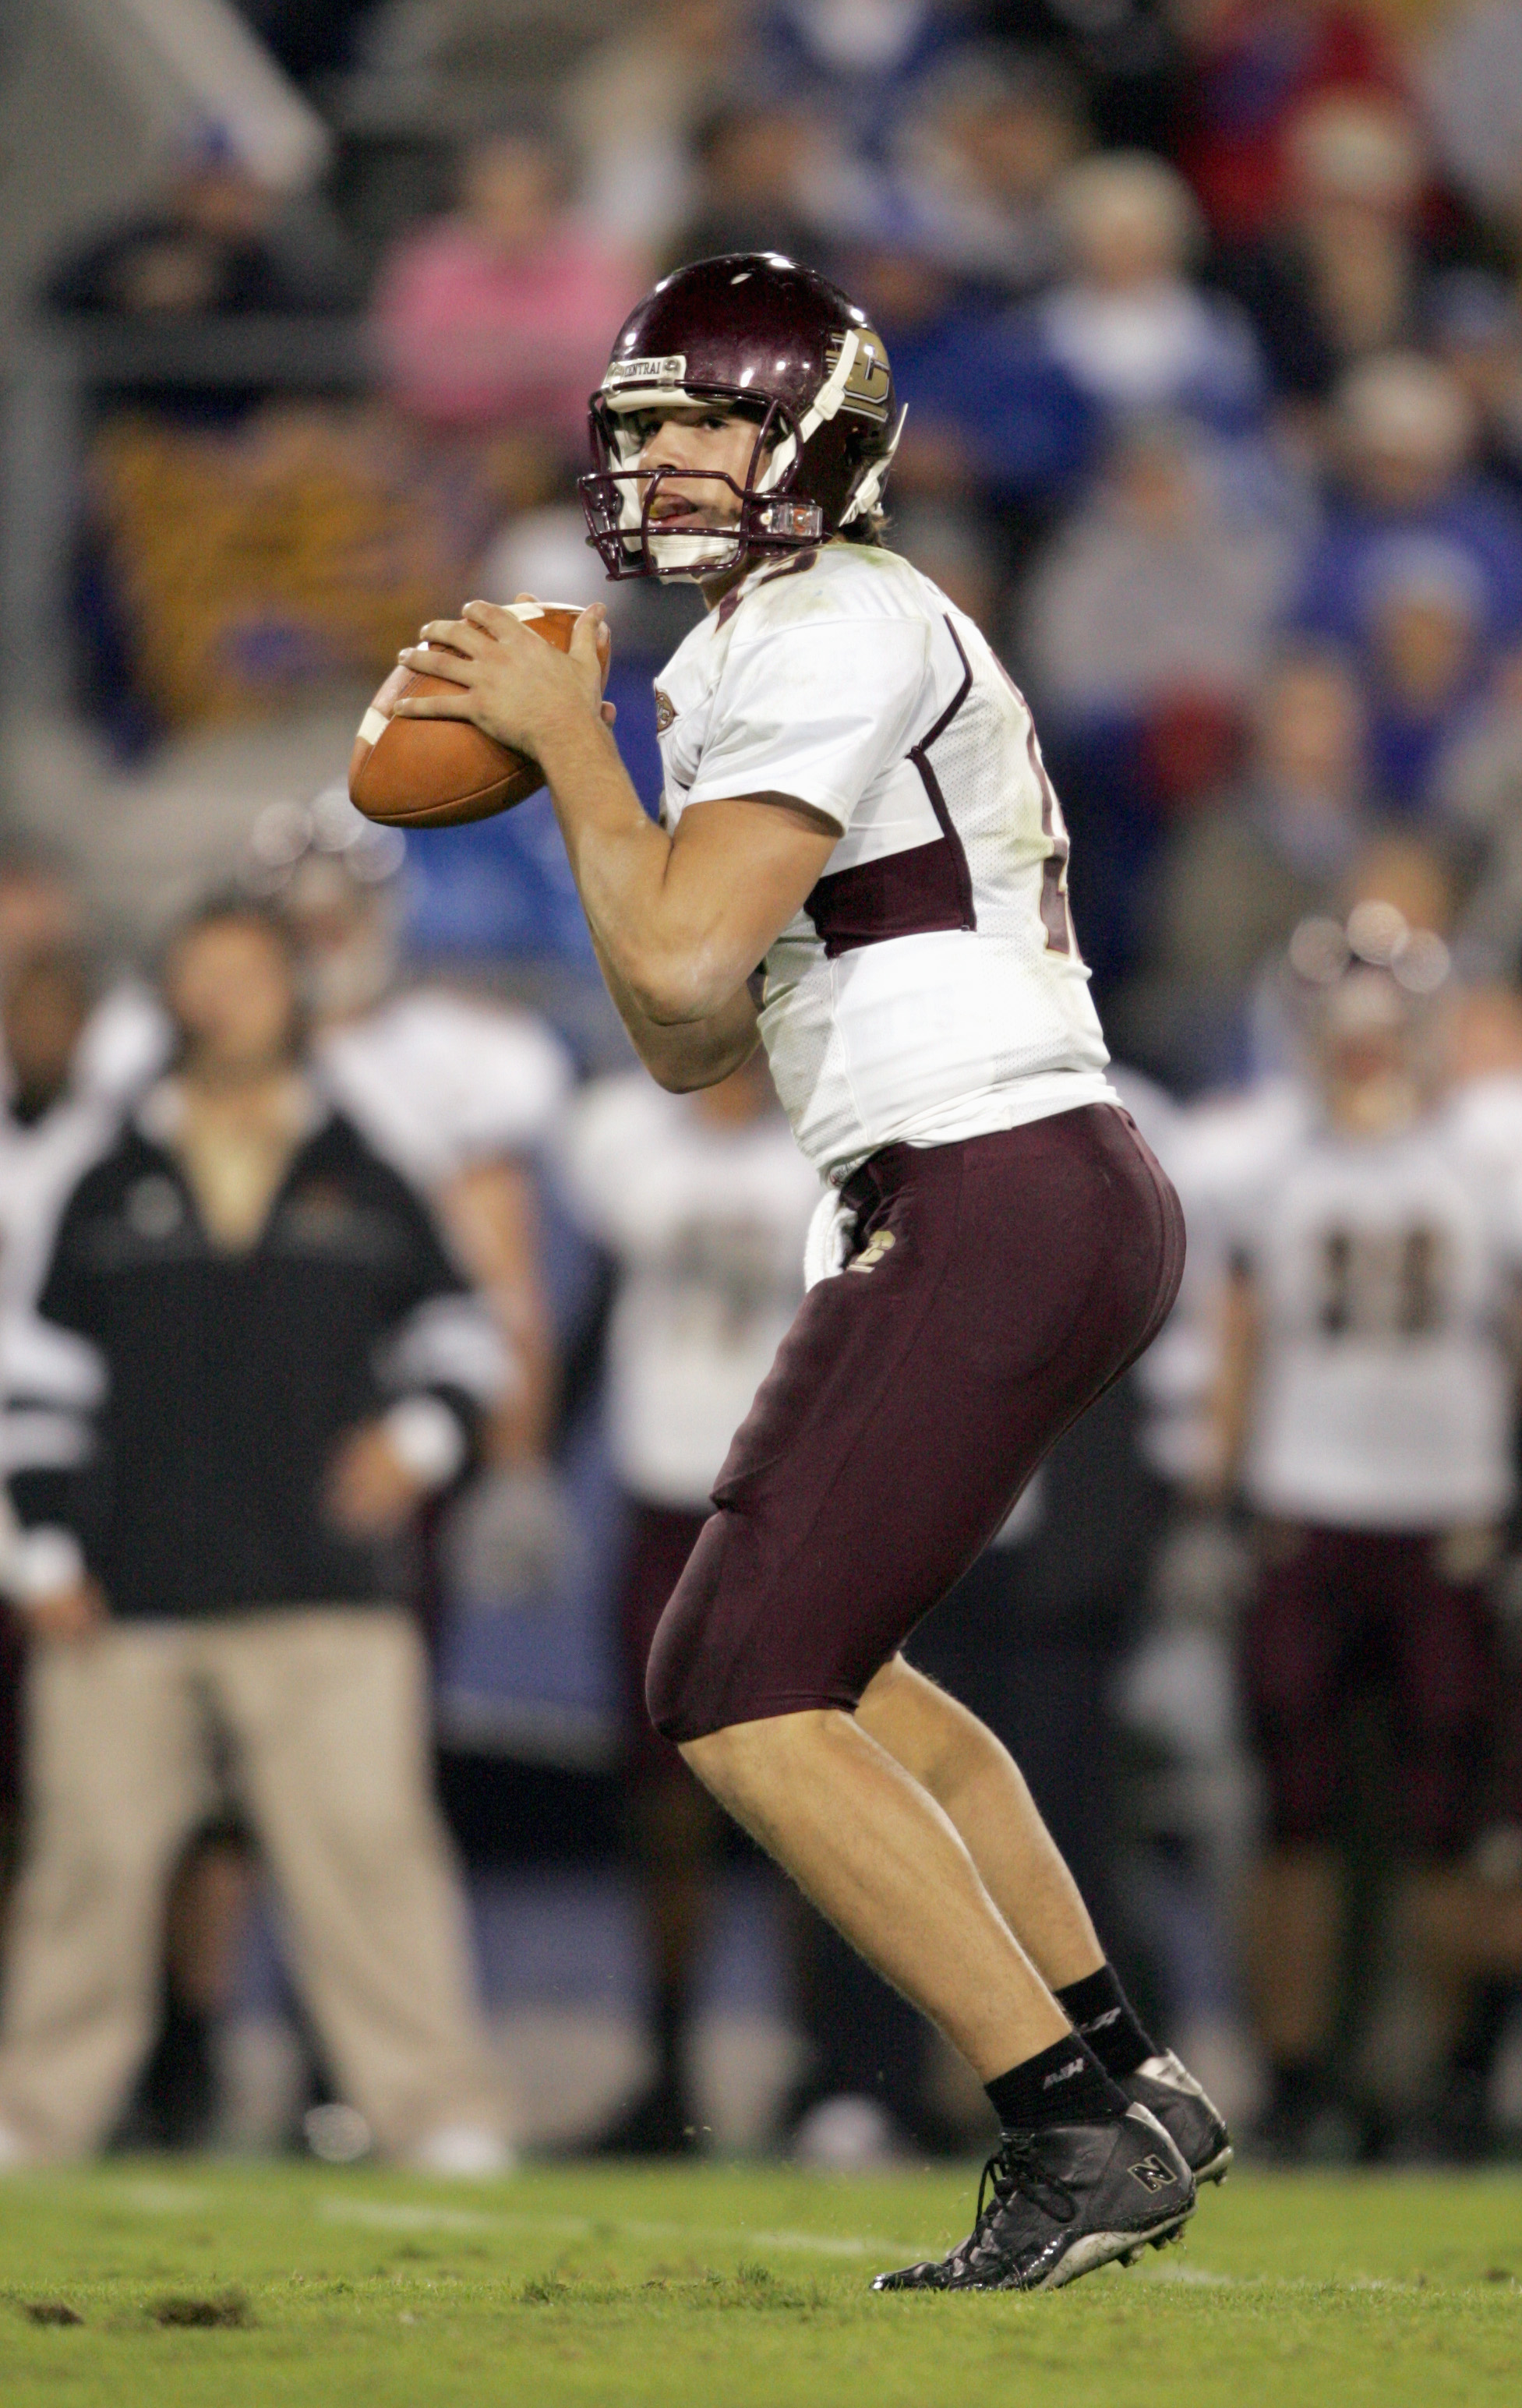 LEXINGTON, KY - SEPTEMBER 30:  Quarterback Dan LeFevour #13 of the Central Michigan Chippewas looks to pass the ball during the game against the Kentucky Wildcats on September 30, 2006 at Commonwealth Stadium in Lexington, Kentucky. (Photo by Andy Lyons/G